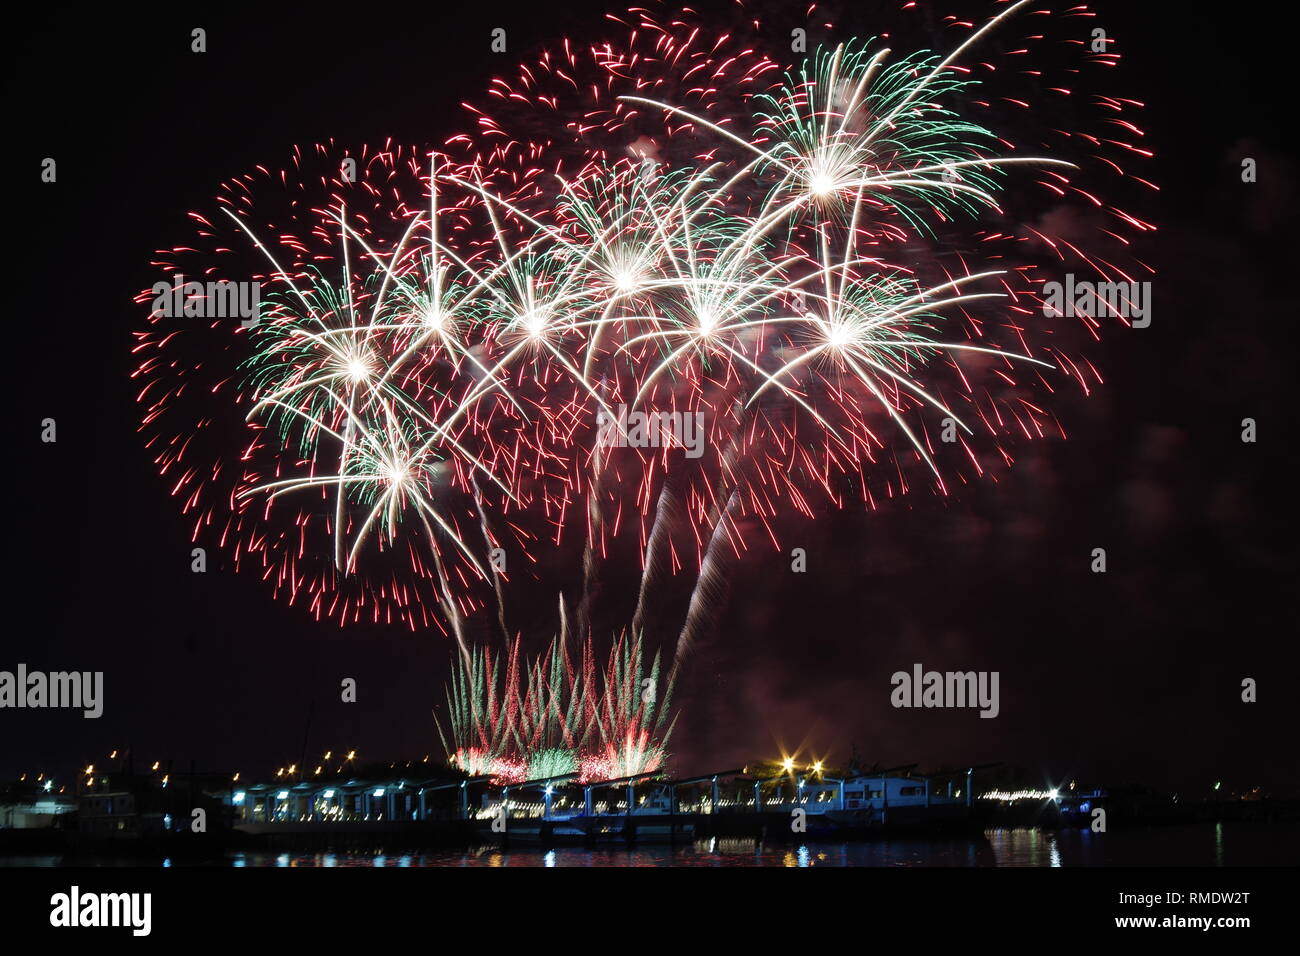 A colorful fireworks display at the bay where the sky was lit up by beautiful lights. Stock Photo